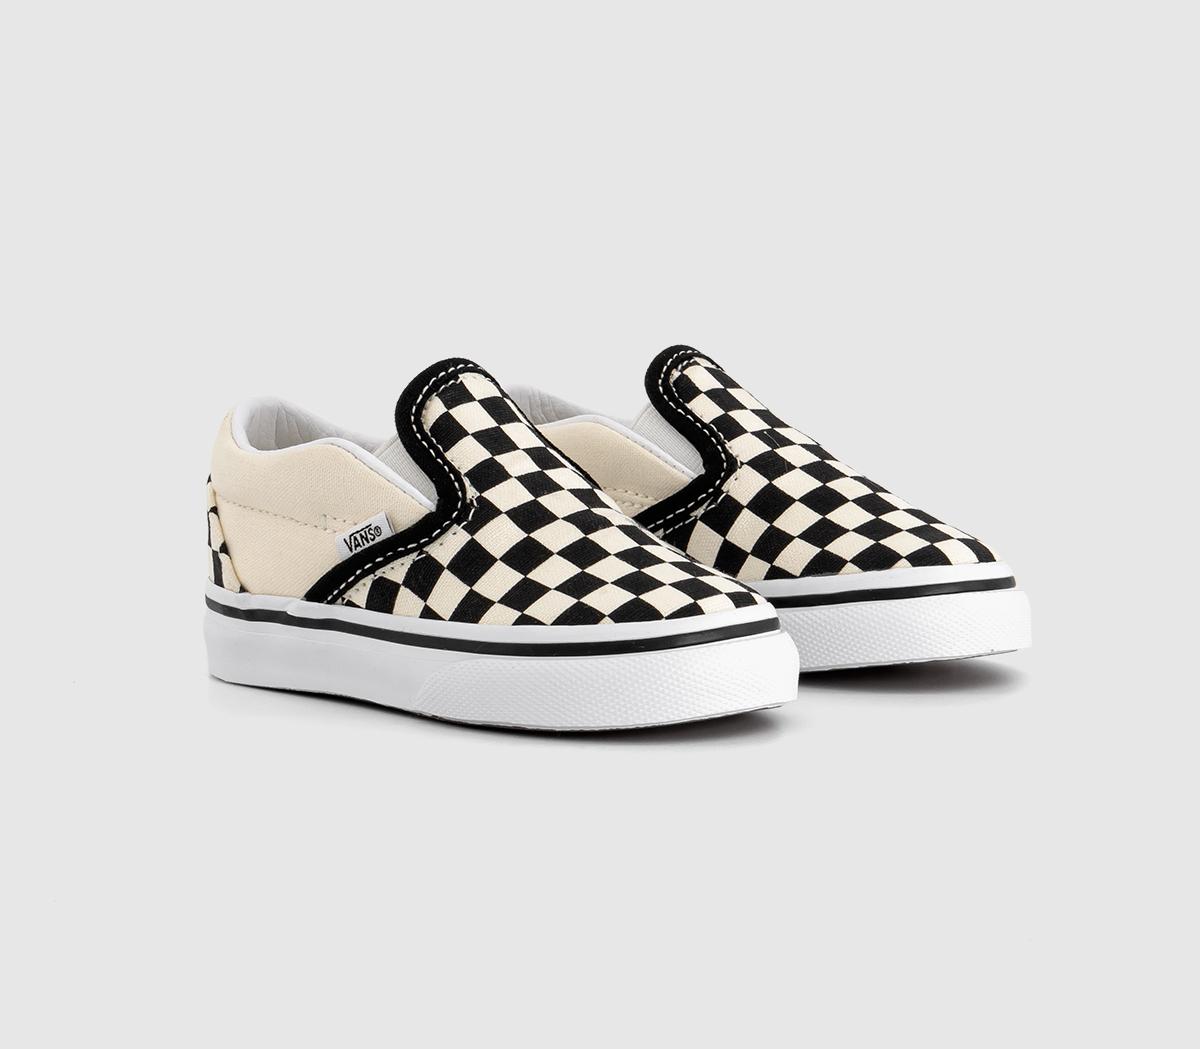 Vans Kids Toddlers Black And White Checkerboard Classic Slip On, 9 Infant